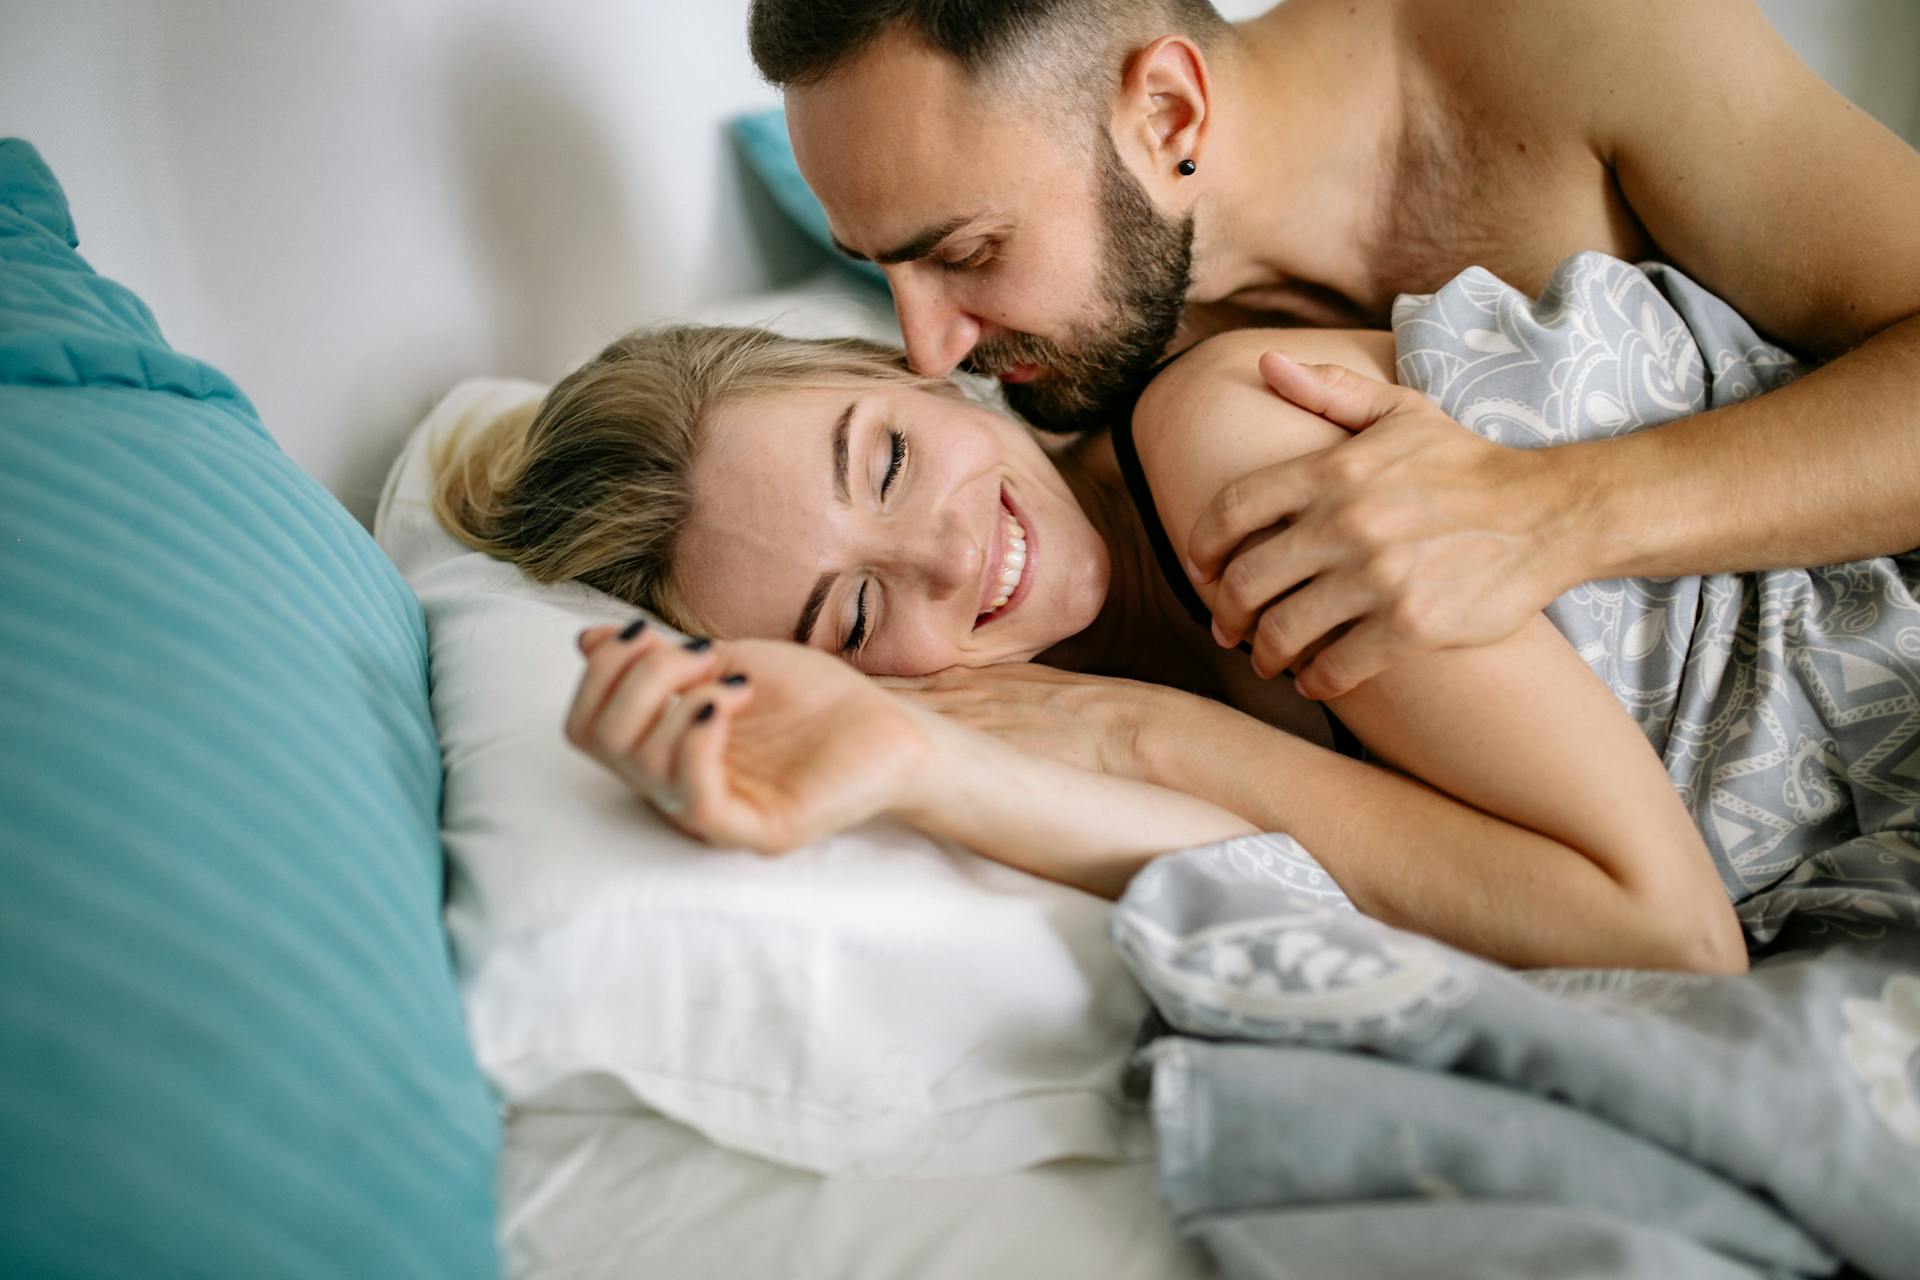 A happy couple cuddling in bed | Source: Pexels